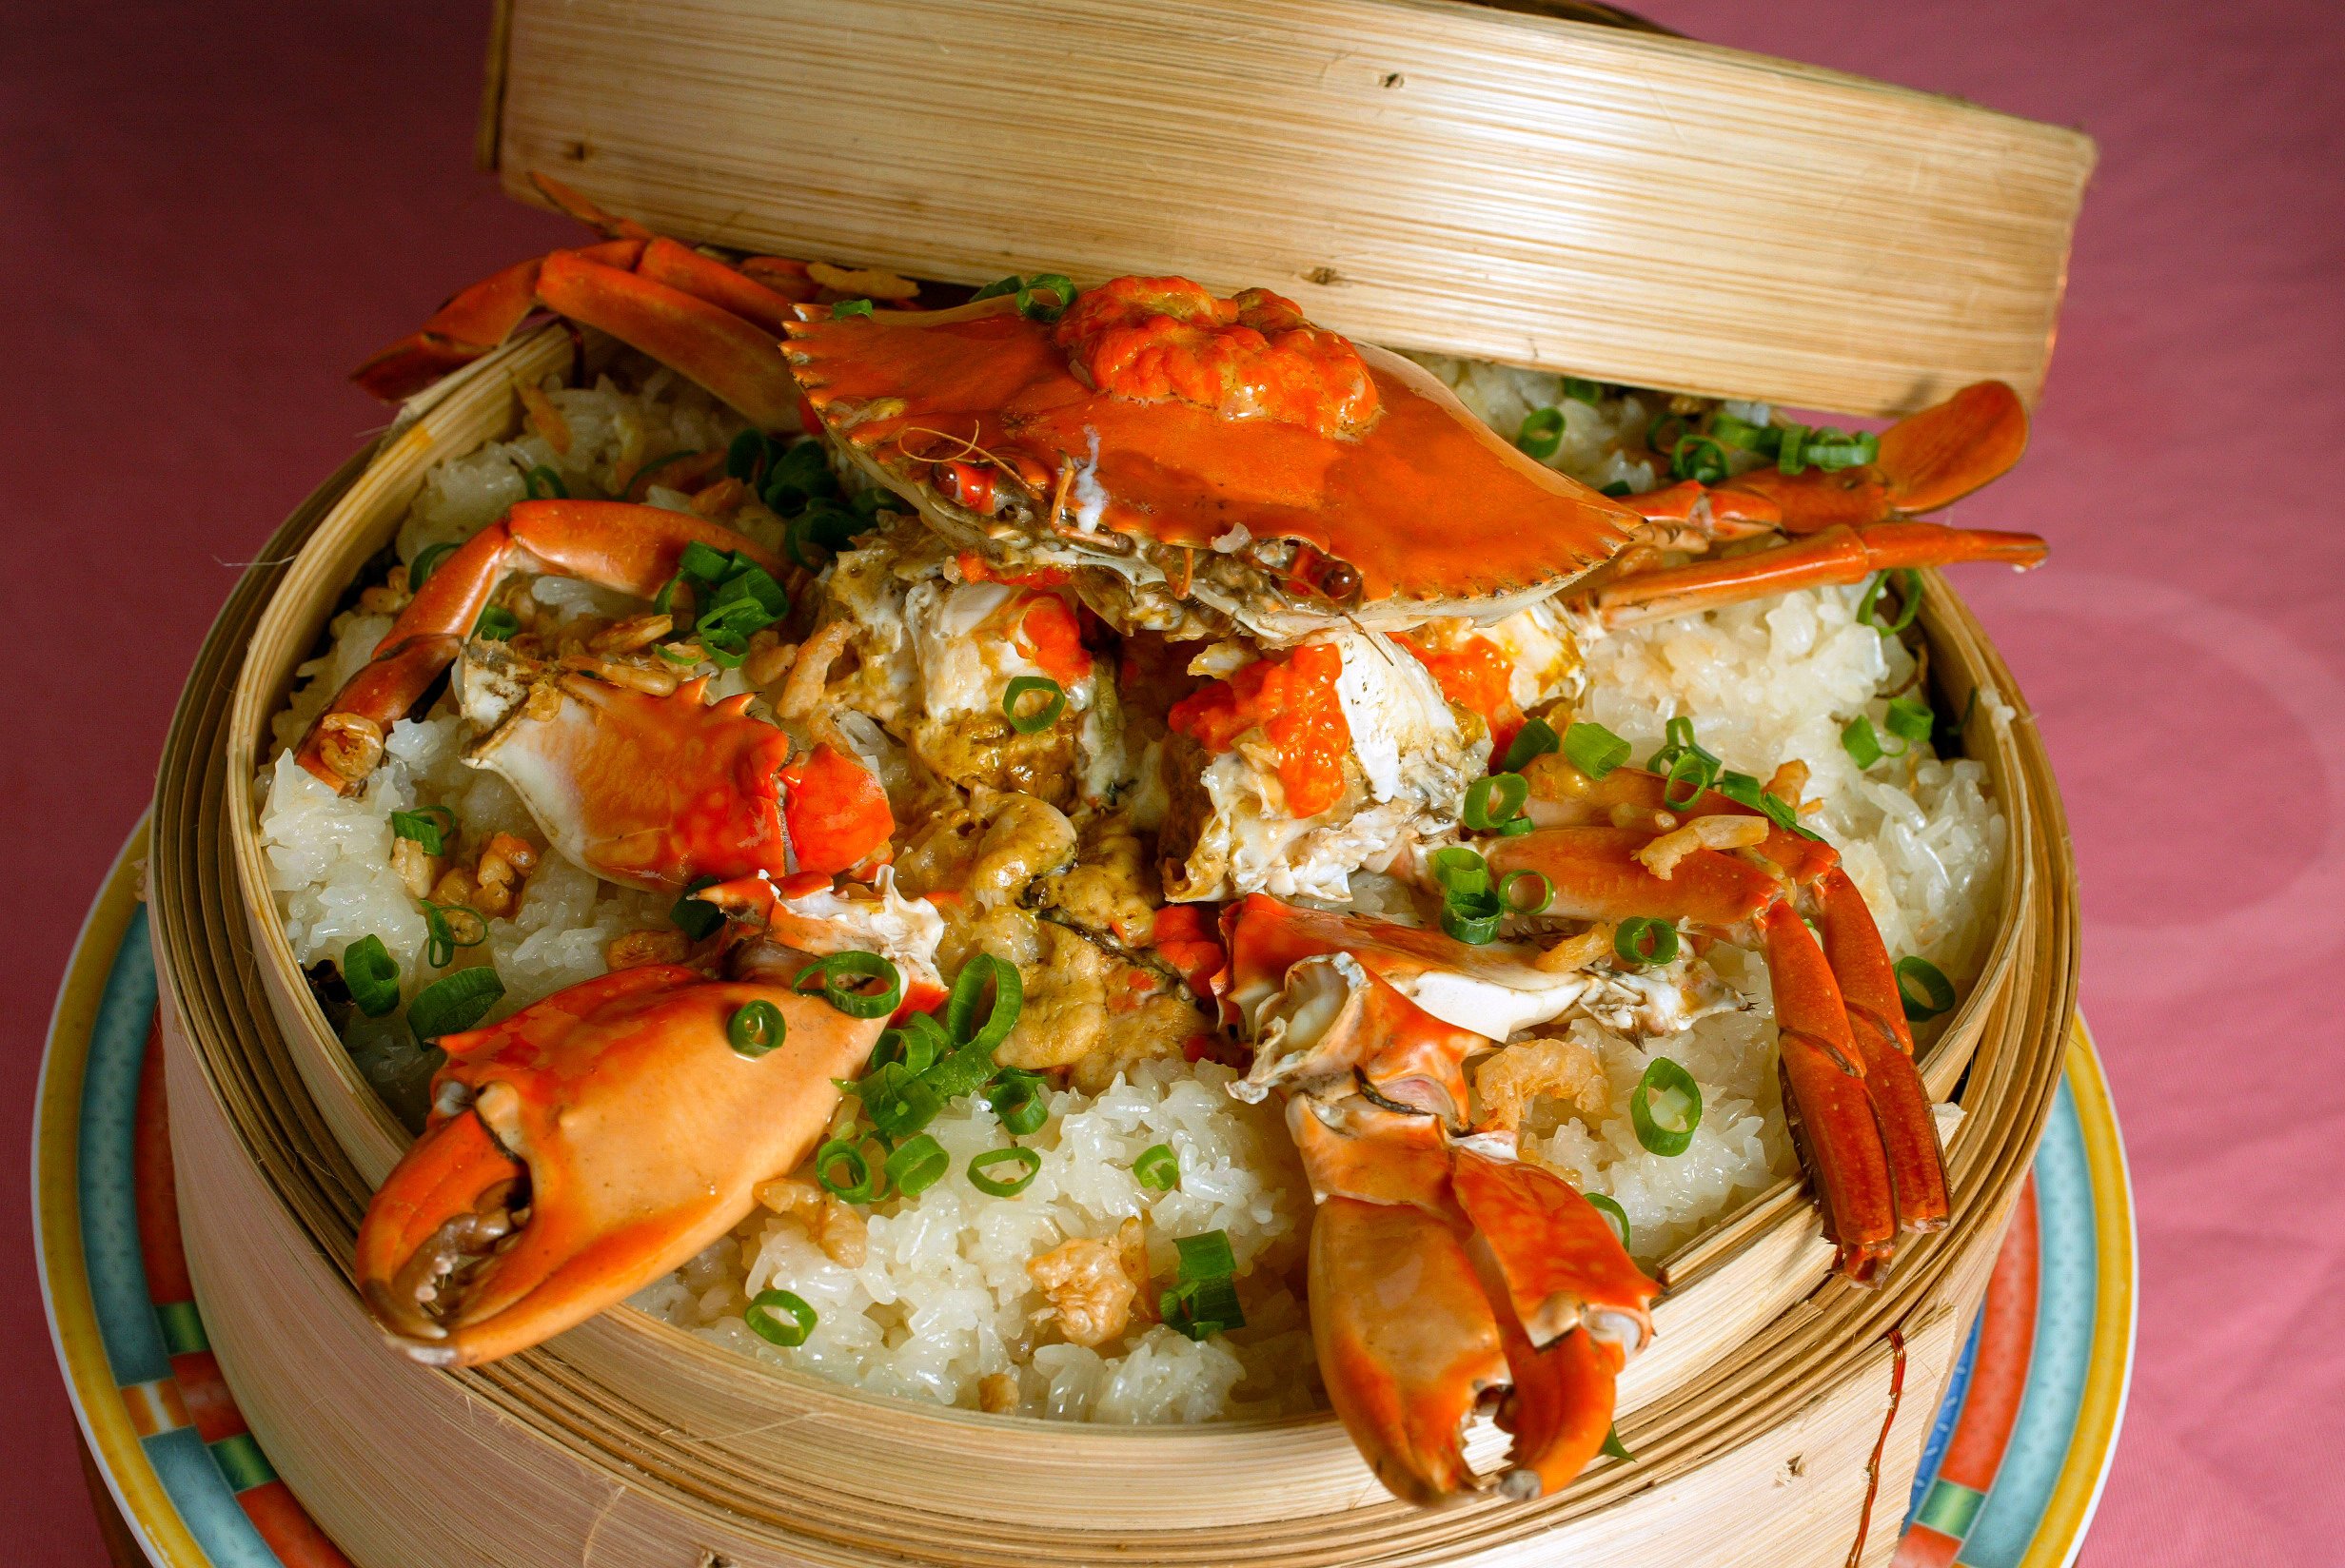 Spicy Chinese wine and steamed crab with glutinous rice at Rainbow Seafood Restaurant. Anthony Cheung, the chef-owner of Italian restaurant Casa Cucina, shares his favourite restaurants in Hong Kong. Photo: SCMP